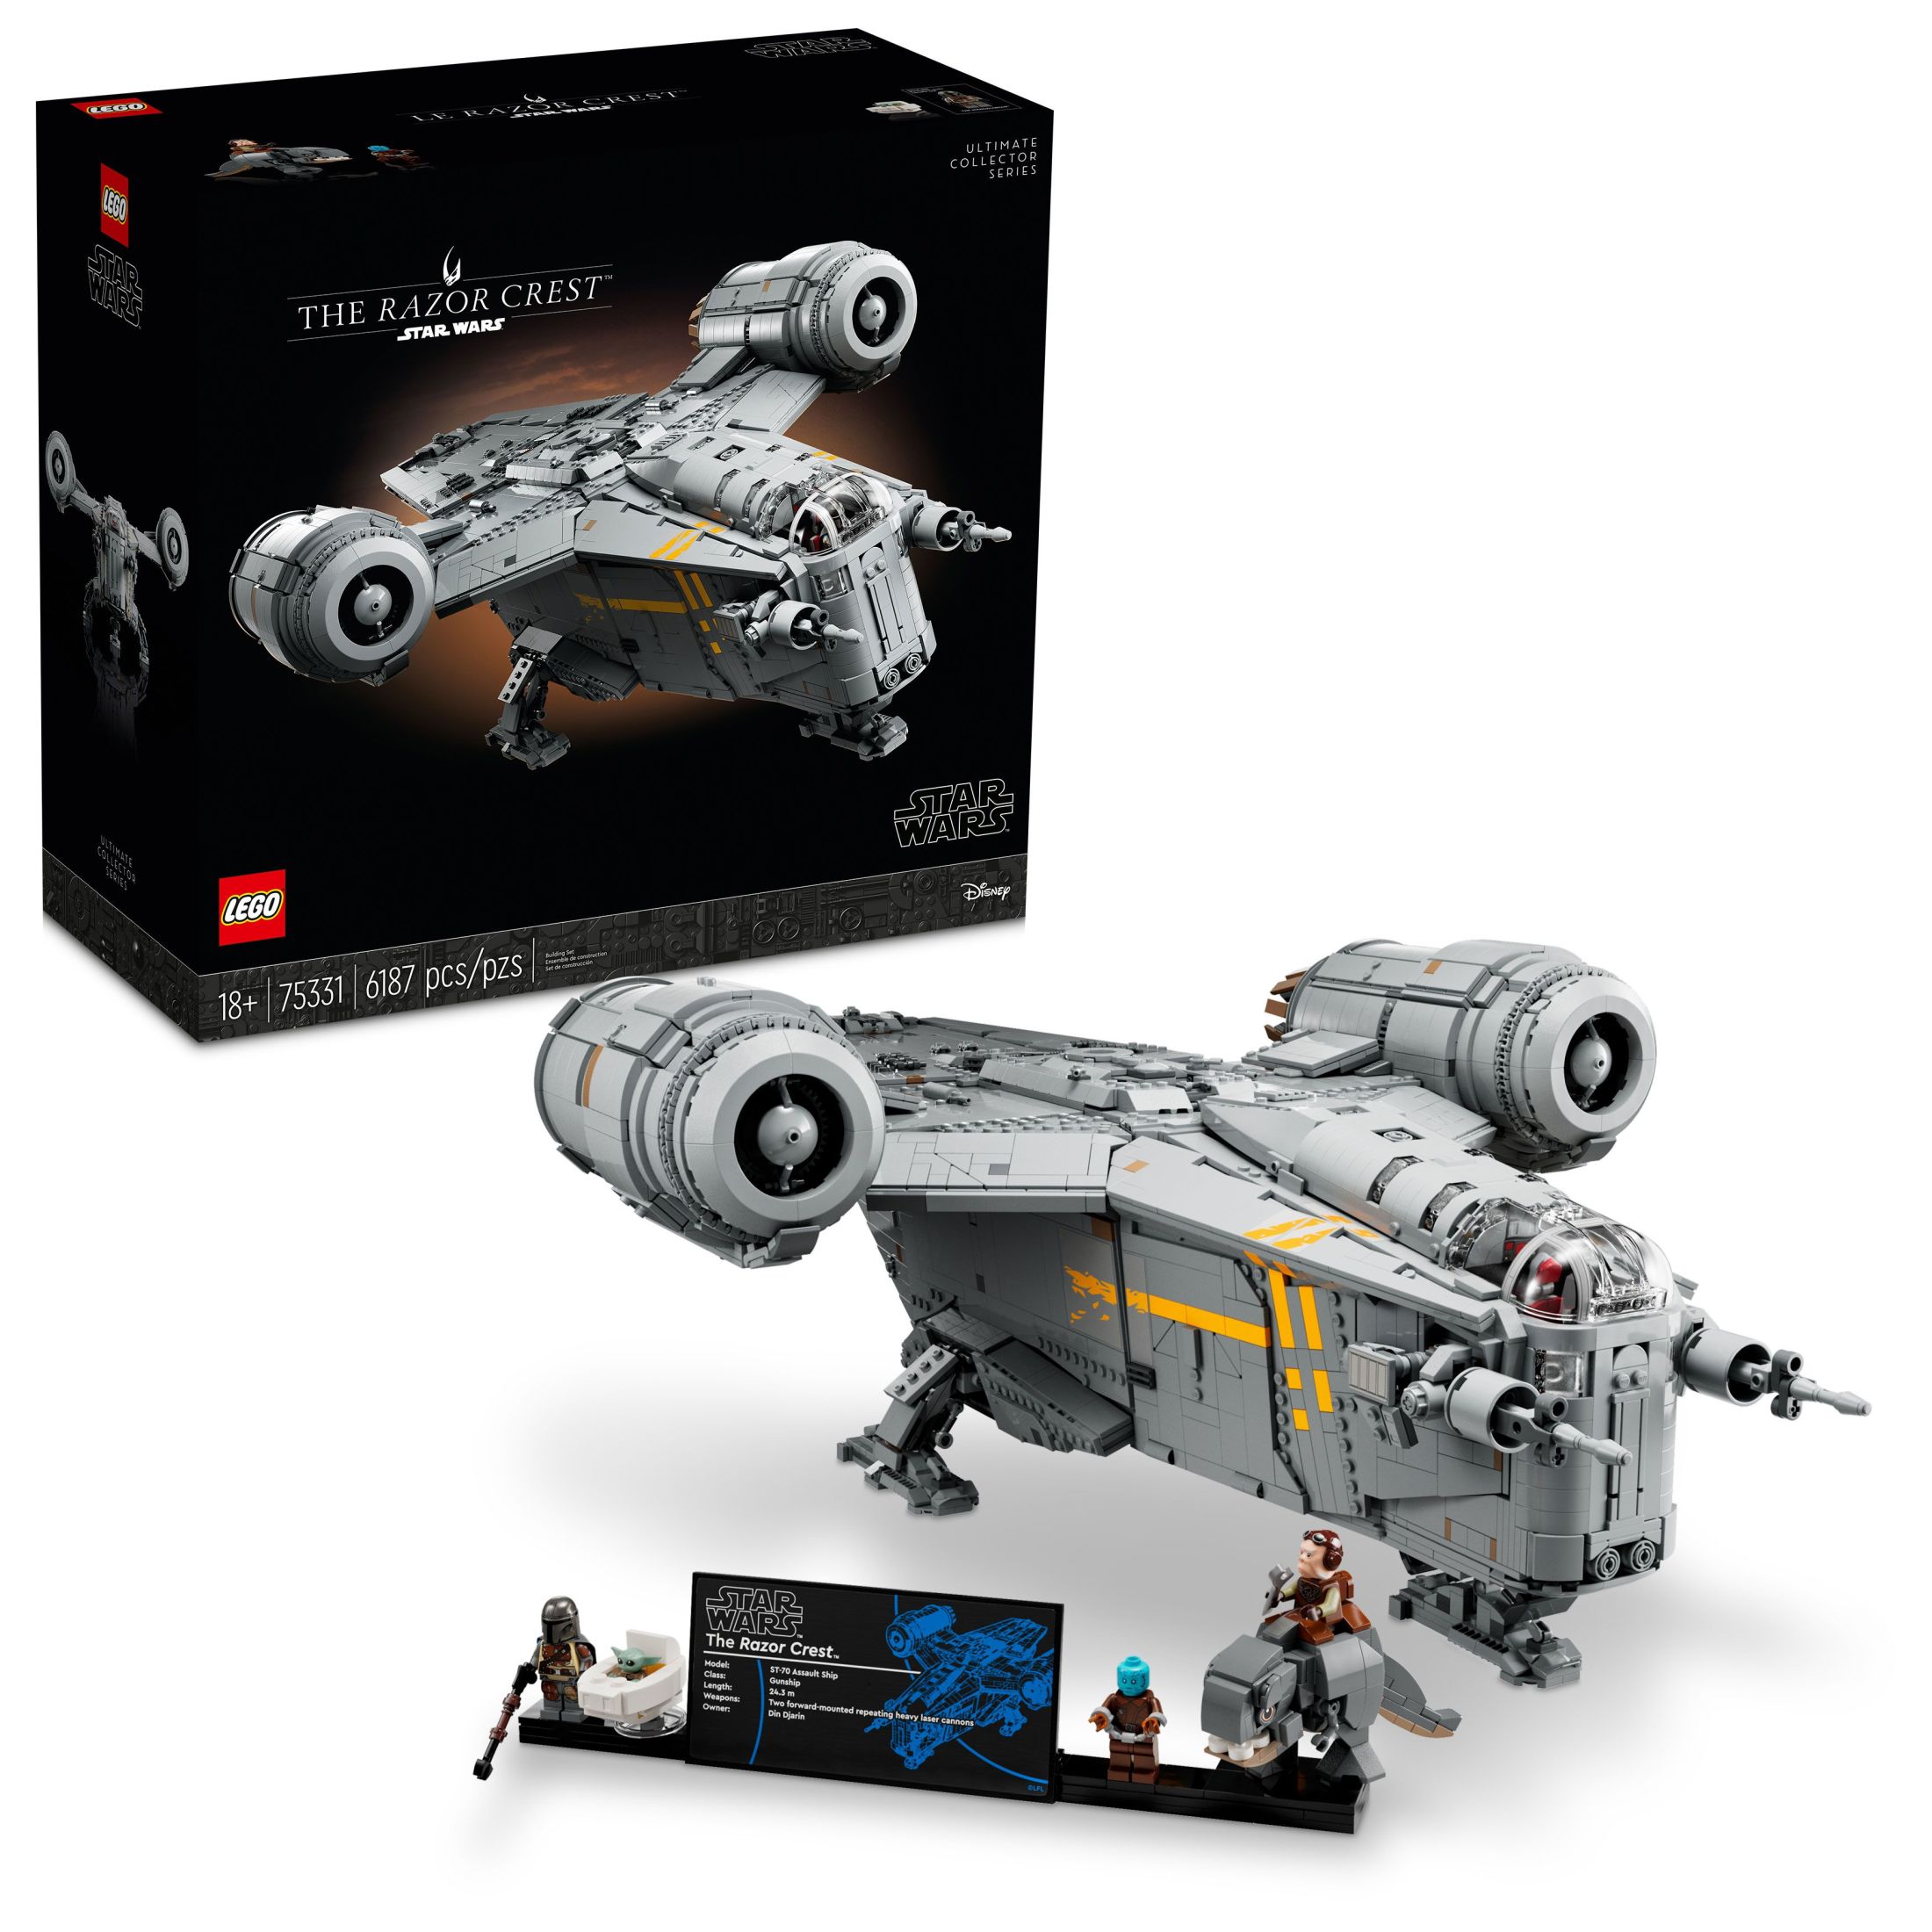 LEGO Star Wars The Razor Crest UCS Starship Set, May the 4th Collectible Model Kit for Adults, Iconic Mandalorian Memorabilia, Great Gift for Star Wars Fans, 75331 - image 1 of 9